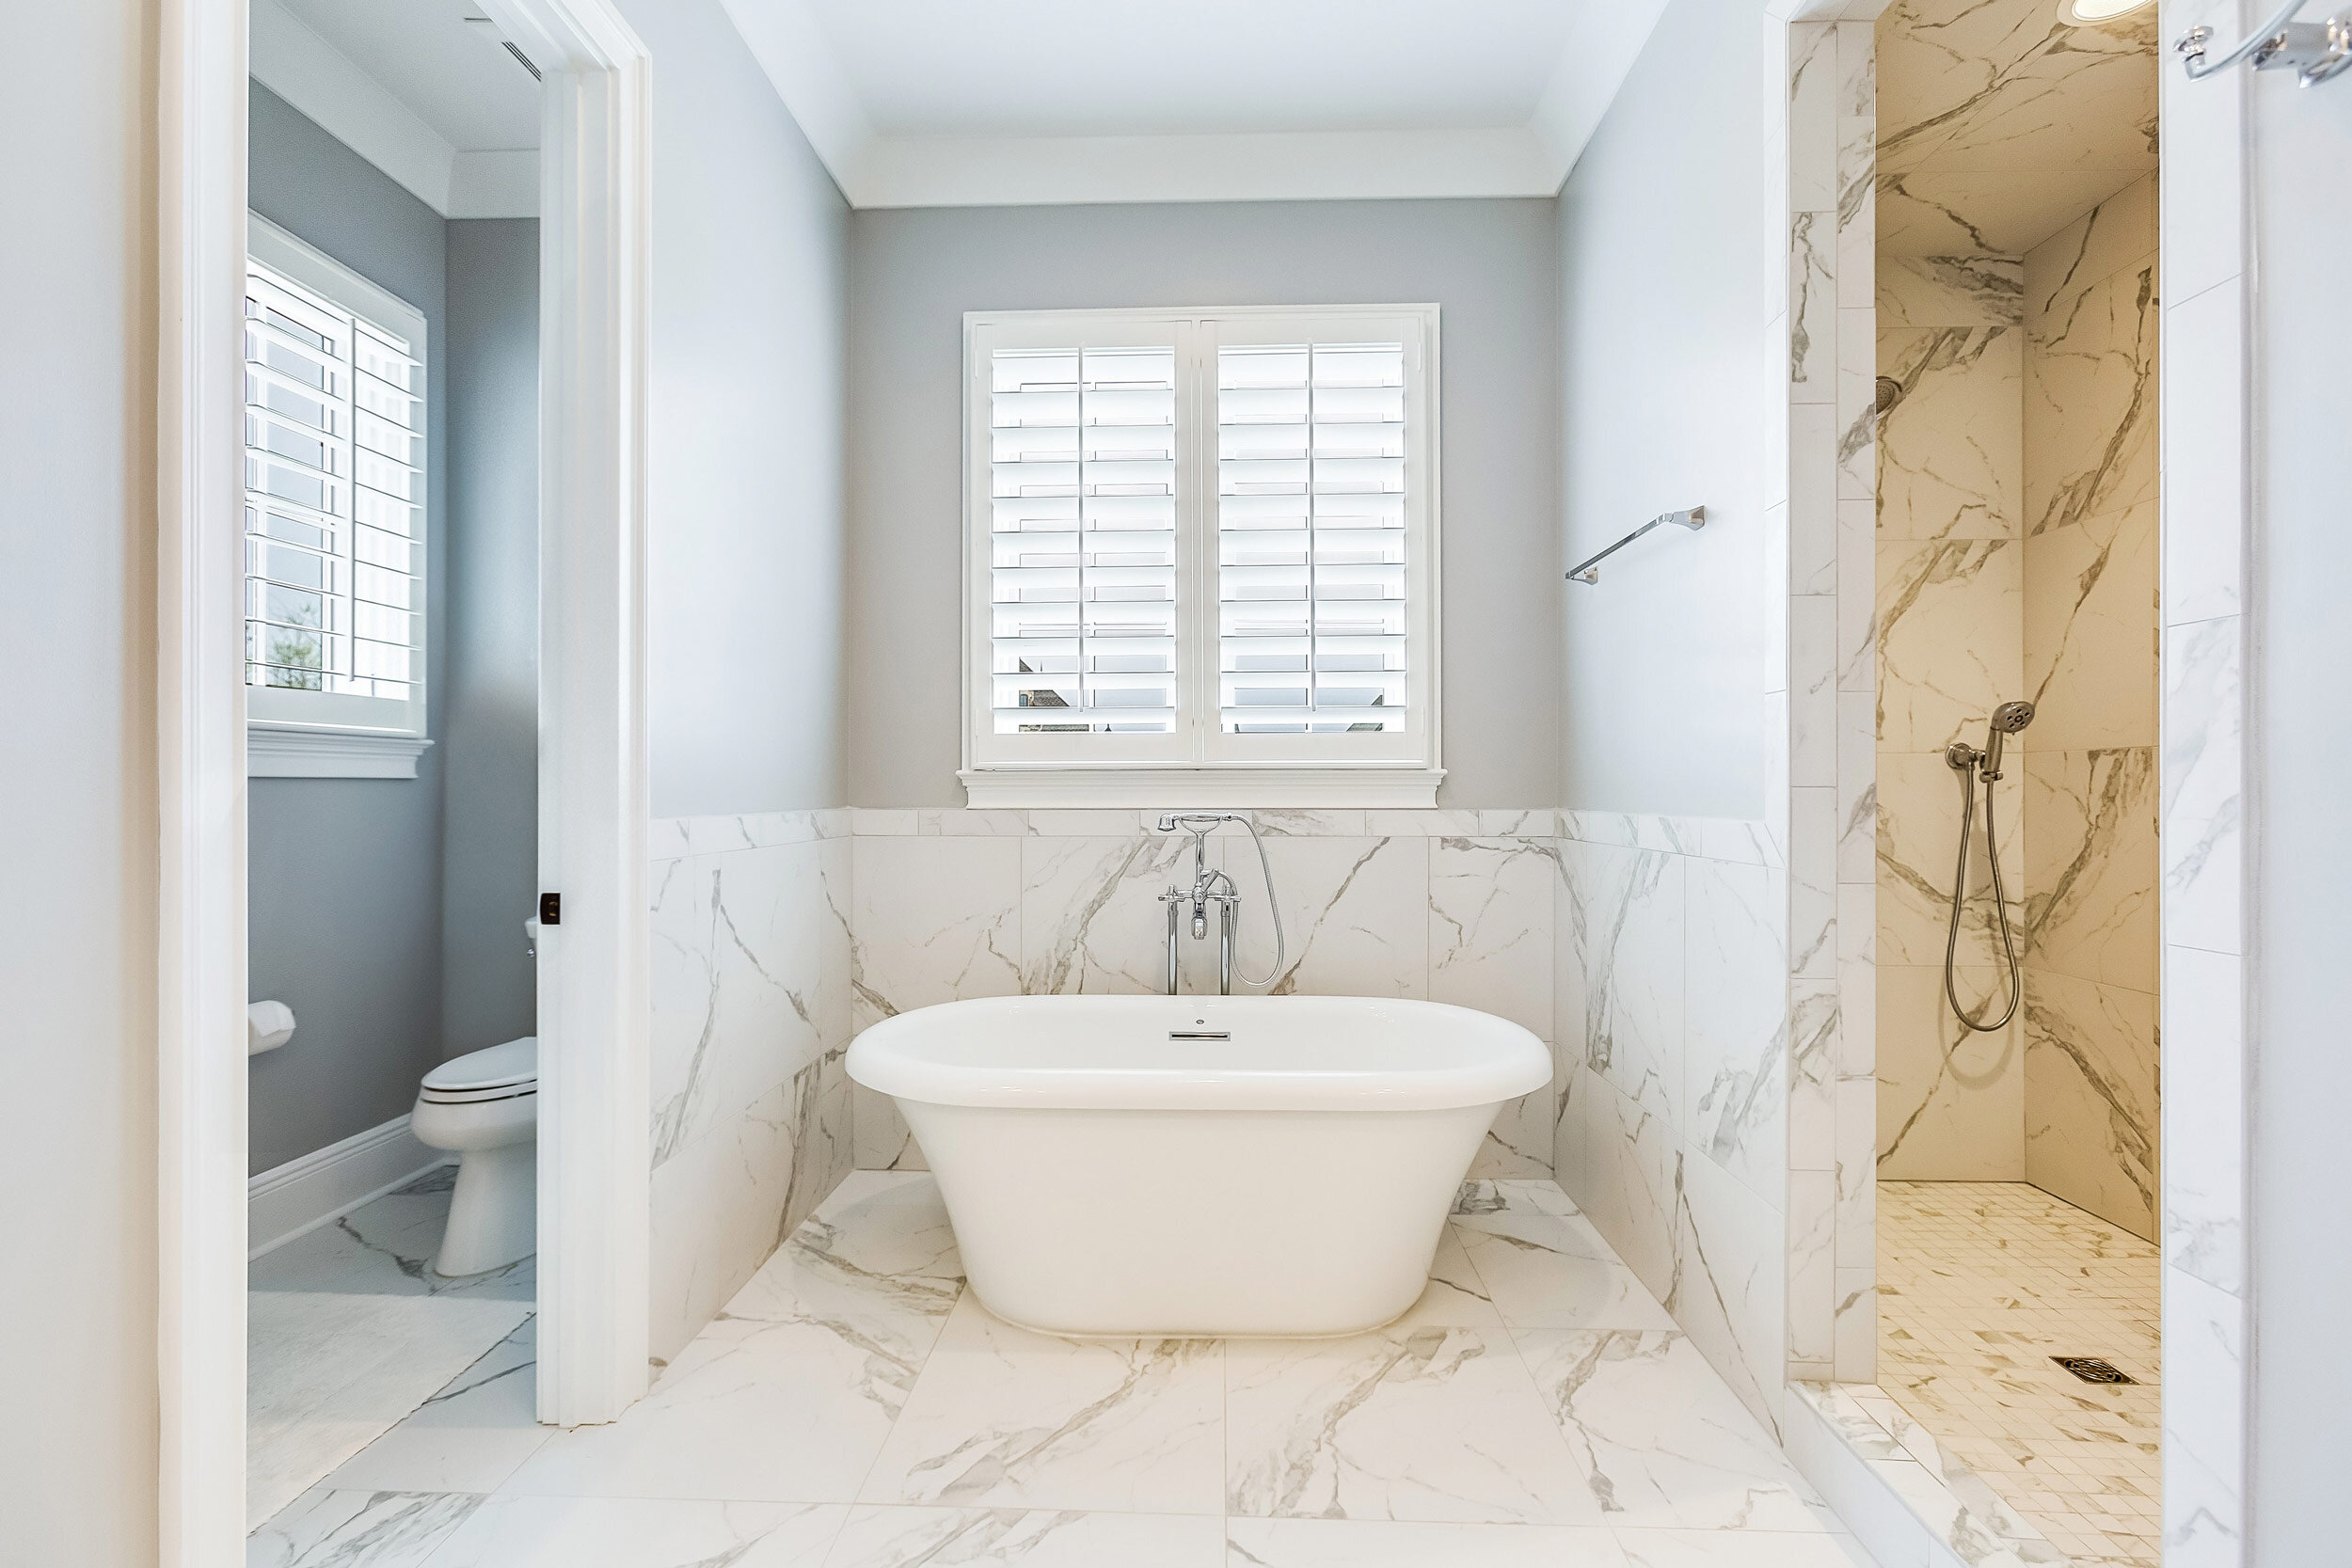 Is A Doorless Shower Right For Your Master Bath Remodel? — Toulmin Kitchen  & Bath | Custom Designed Kitchens & Bathrooms In Tuscaloosa And Northport